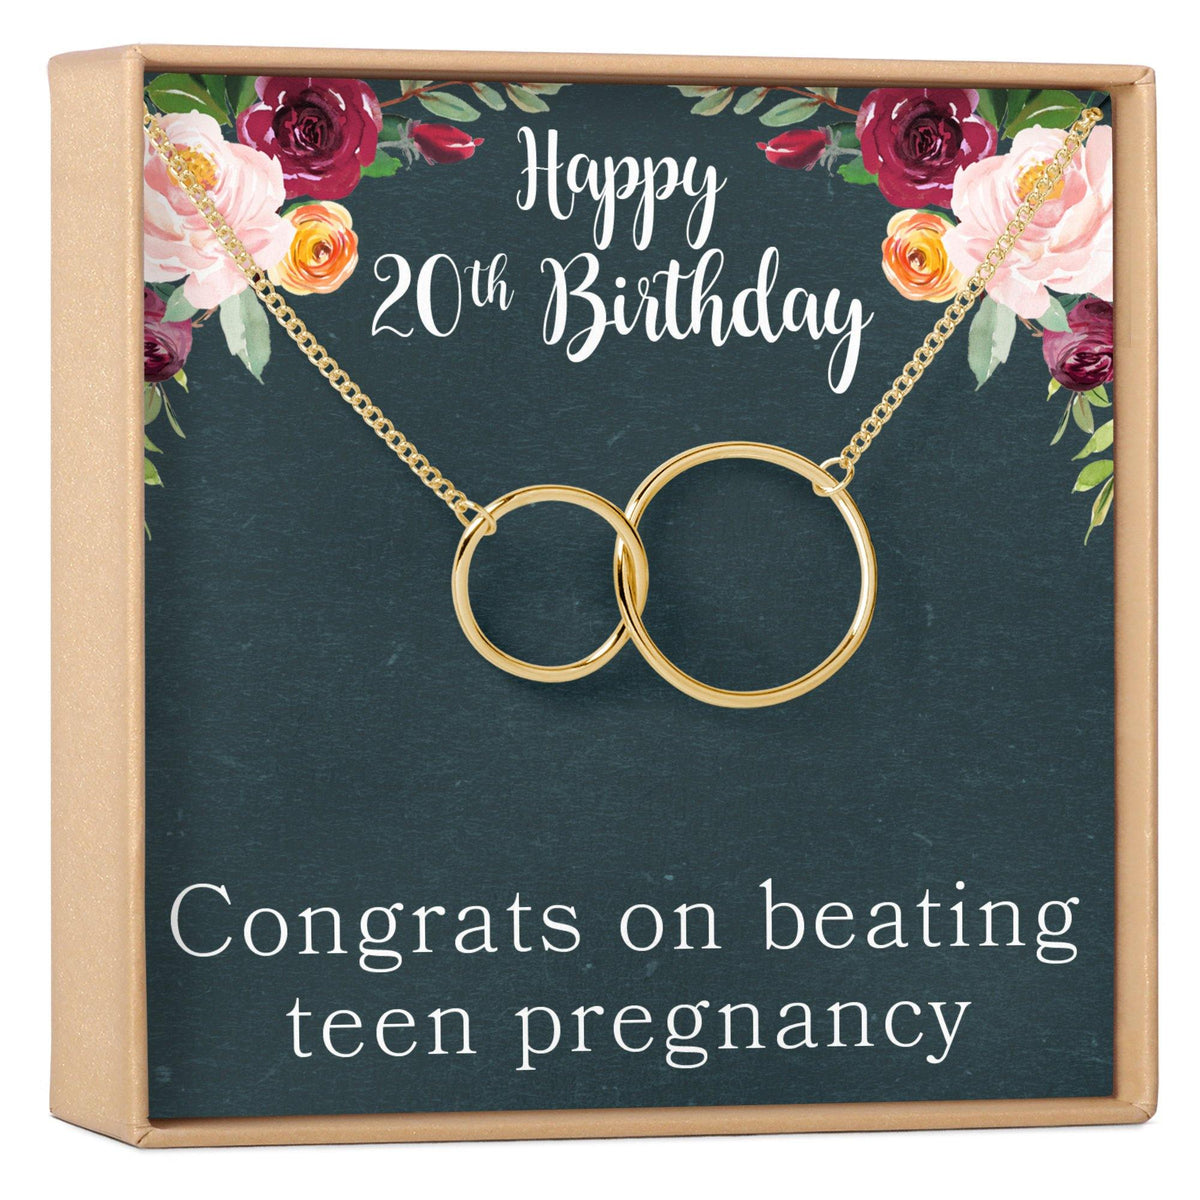 20th Birthday Necklace - Dear Ava, Jewelry / Necklaces / Pendants